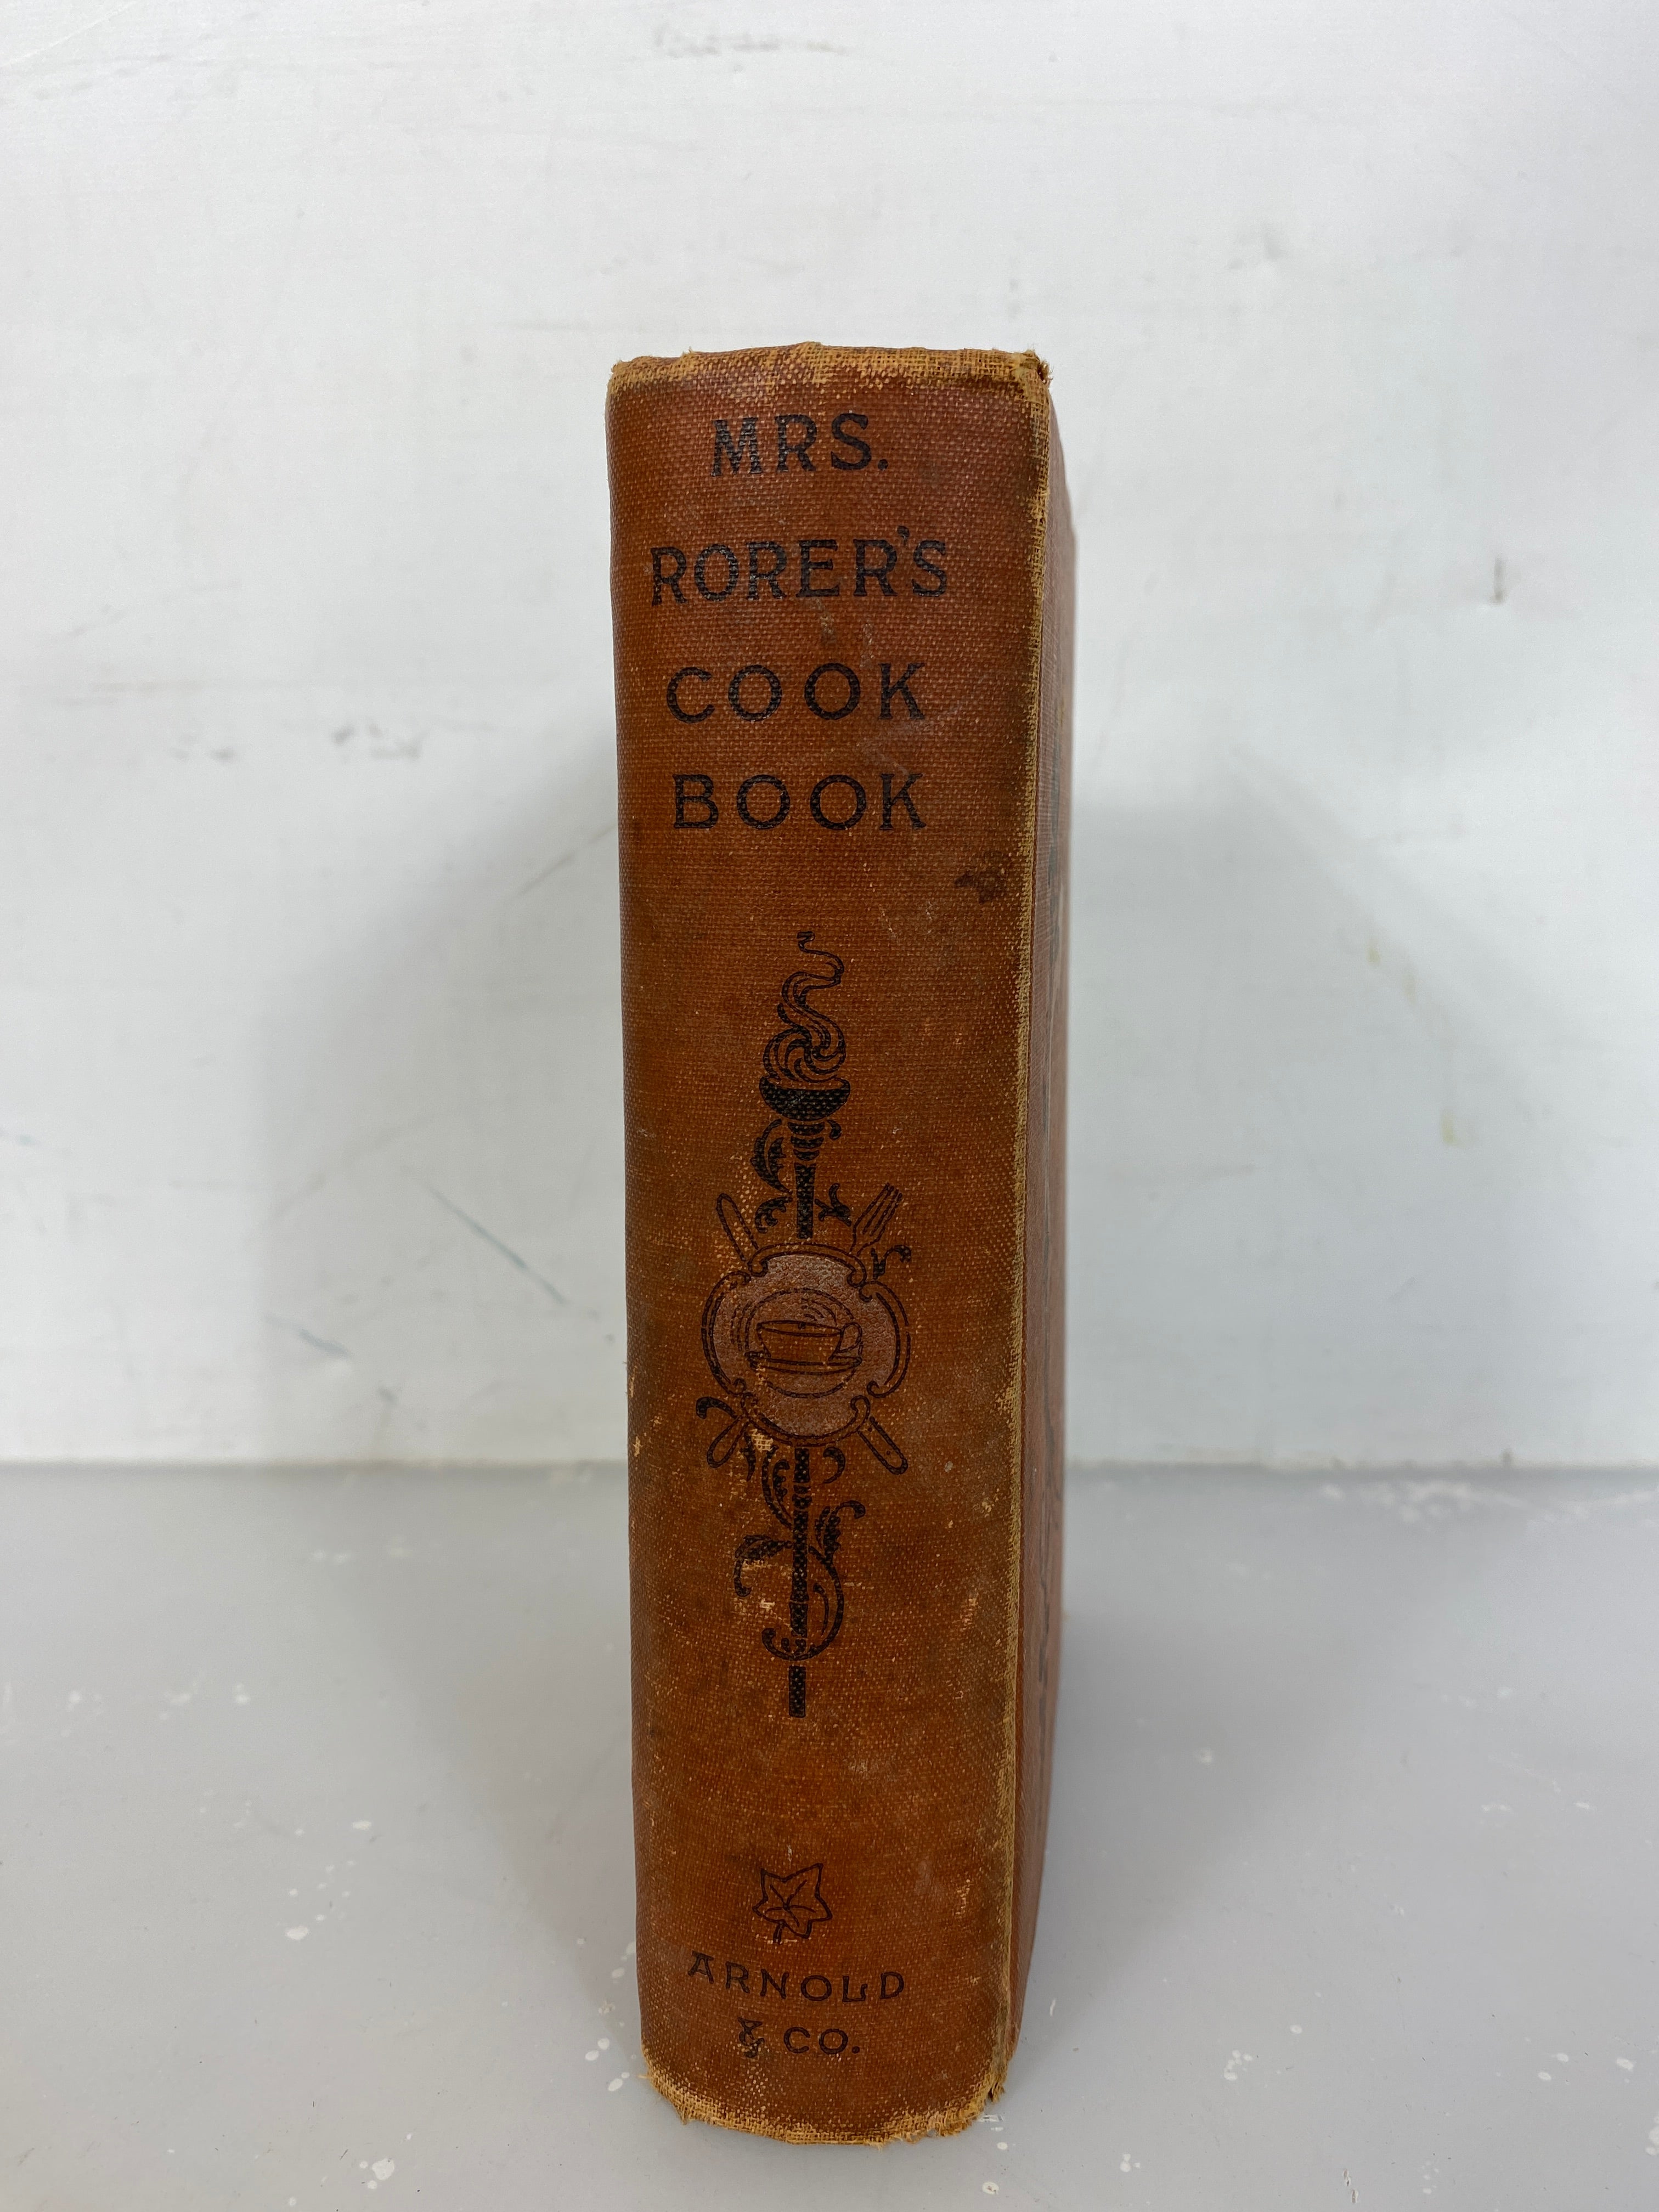 Antique Mrs. Rorer's Philadelphia Cook Book A Manual of Home Economies by Mrs. S.T. Rorer 1914 HC